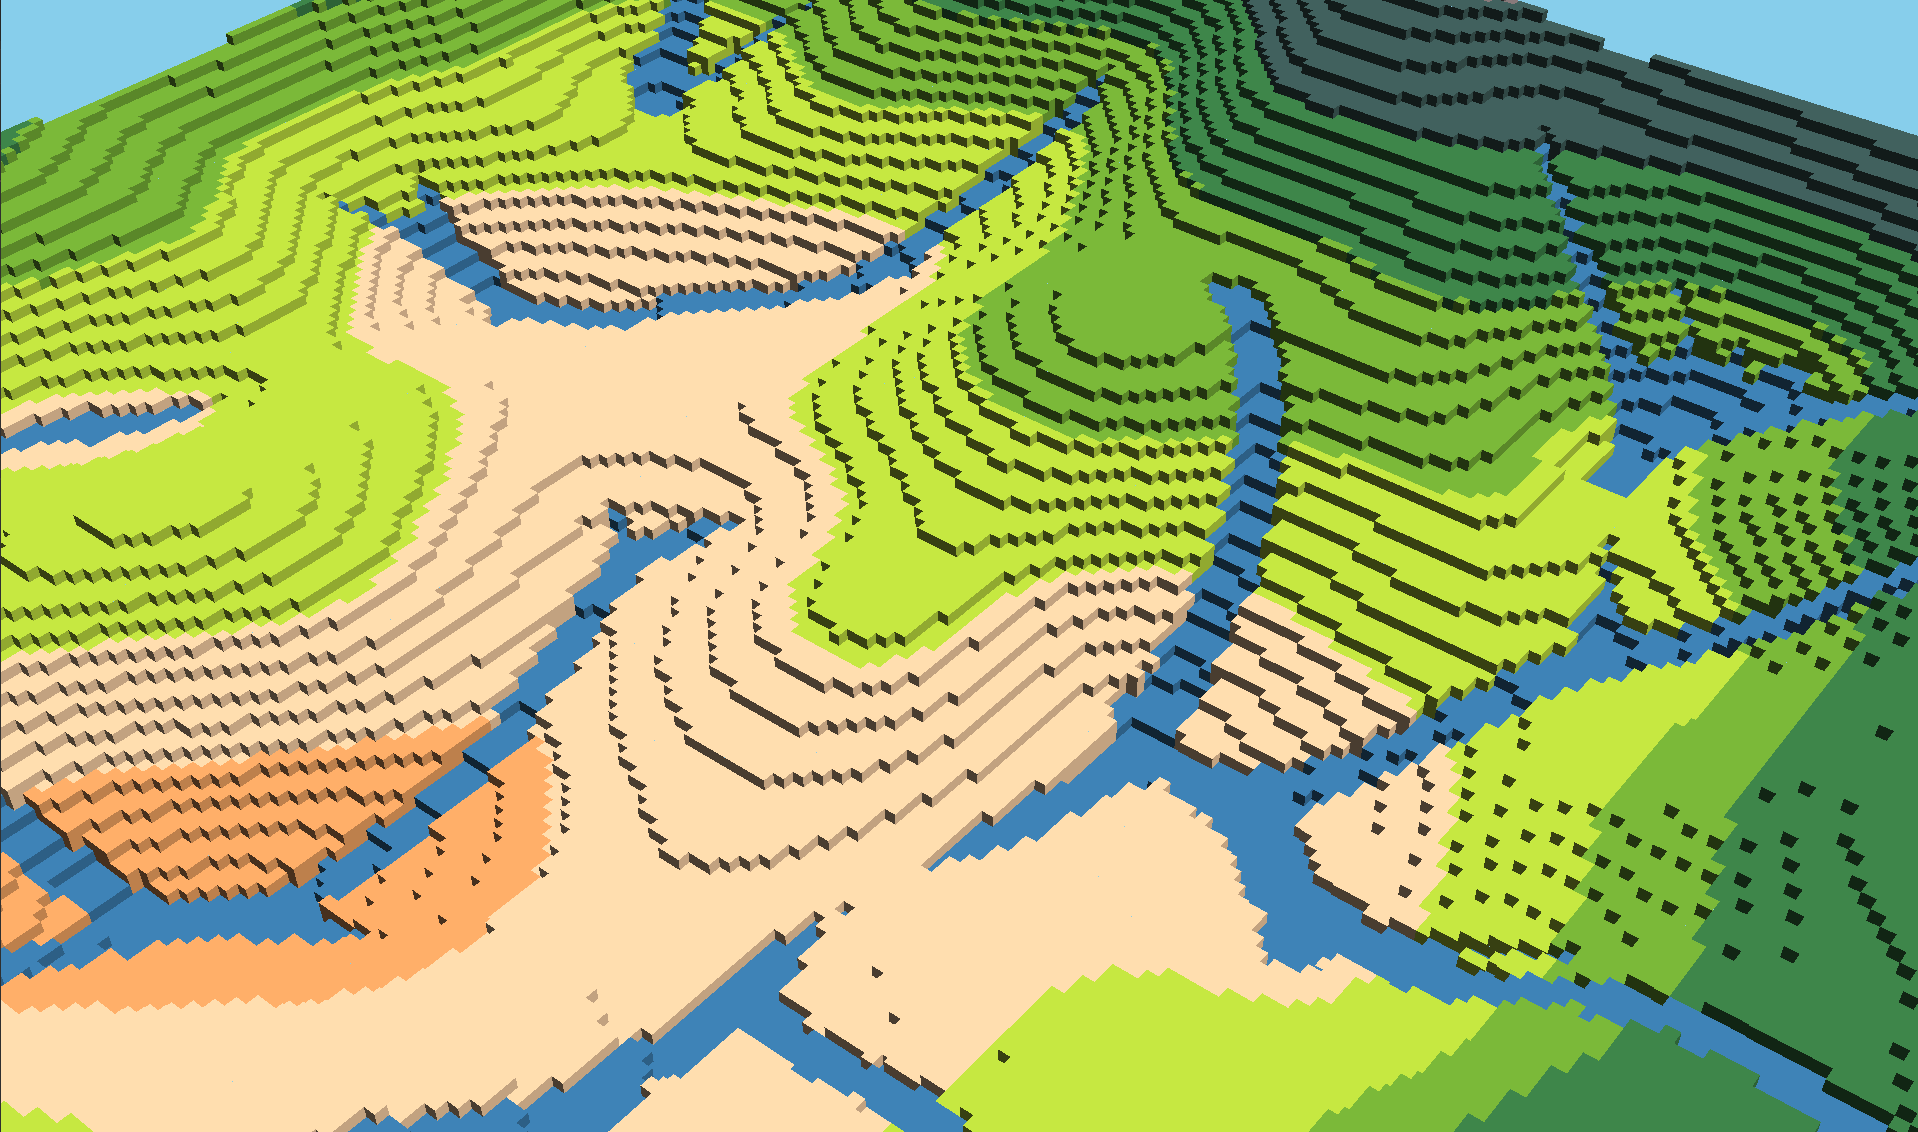 Voxel terrain with slightly unnatural rivers